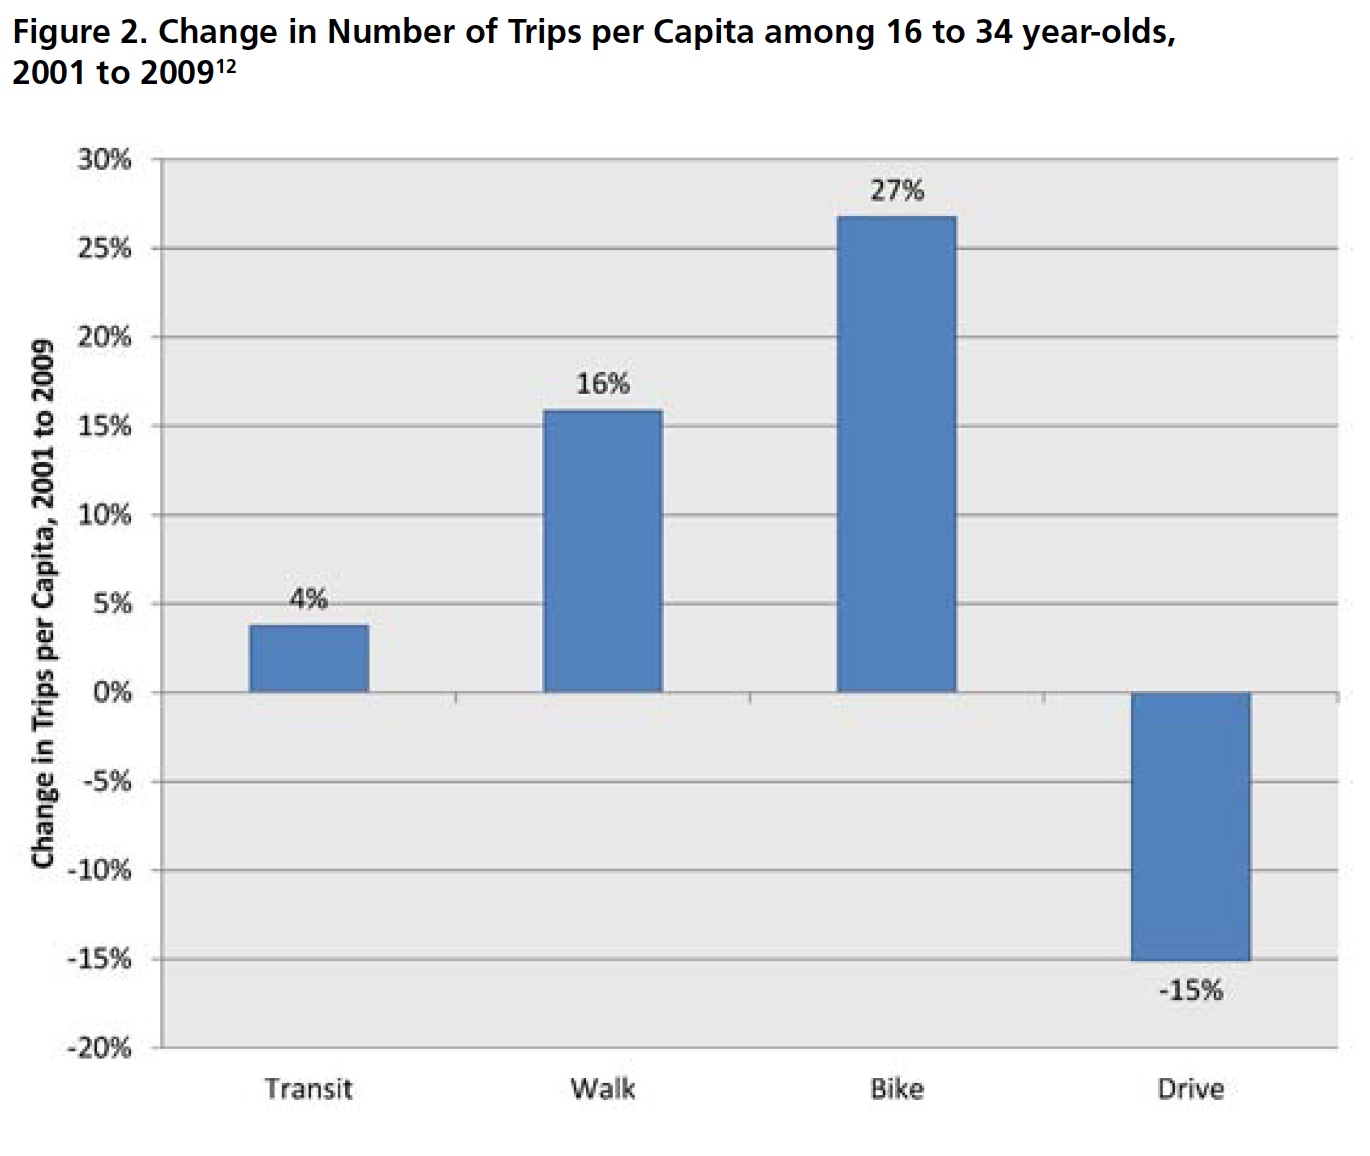 Figure 2. Change in Number of Trips per Capita among 16 to 34 year-olds, 2001 to 2009